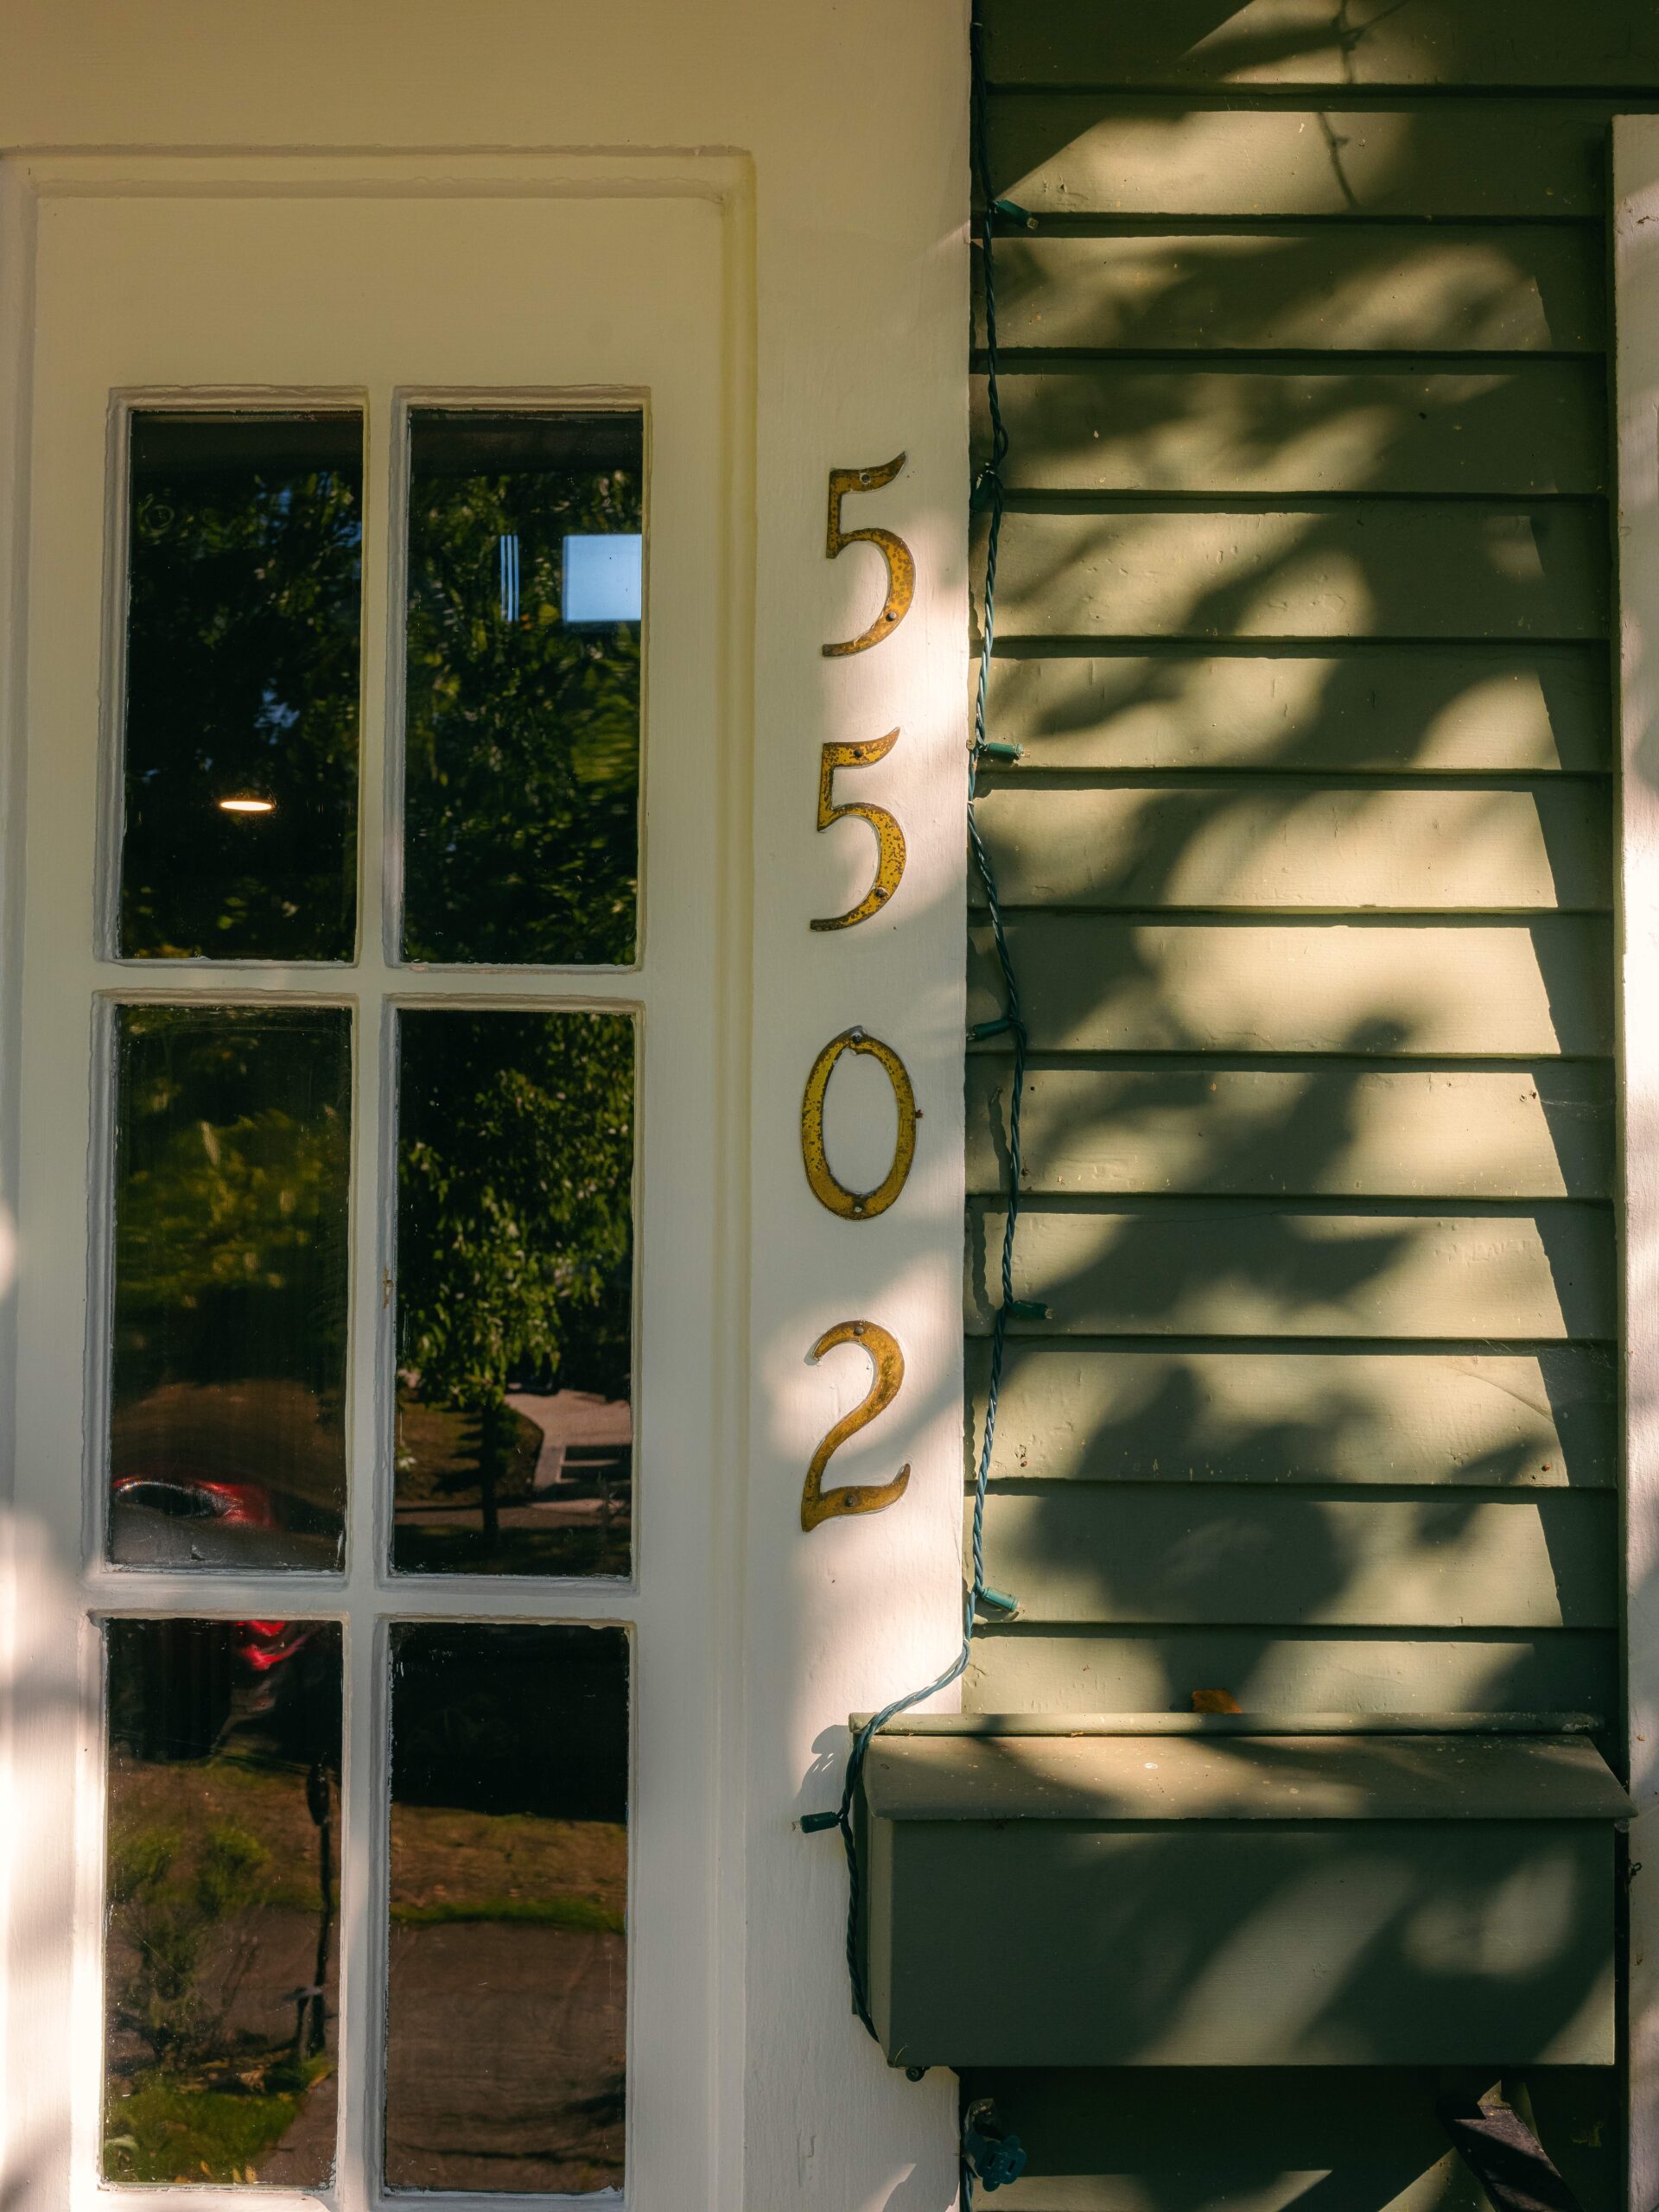 Vintage gold numbers display the spa address 5502 34th Ave NE, Seattle 98105